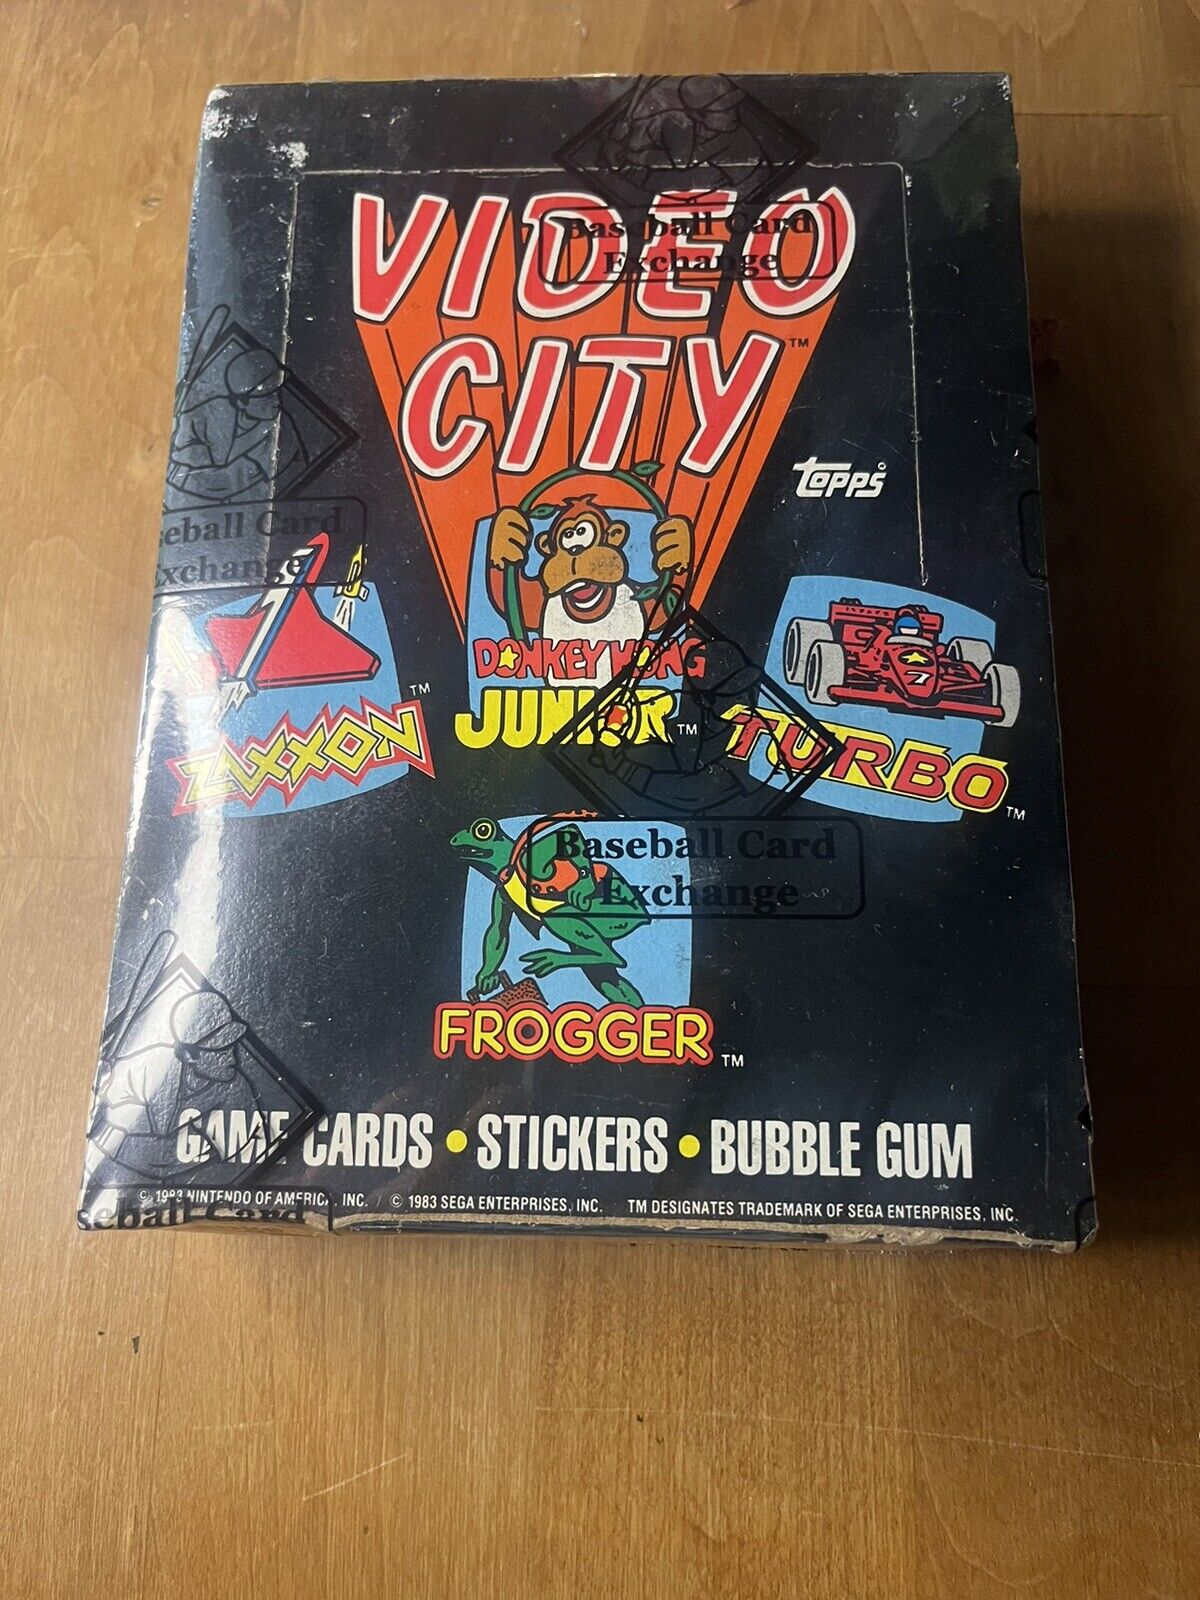 1983 Topps Video City Wax Box BBCE Authenticated 36 Packs Sealed Rare